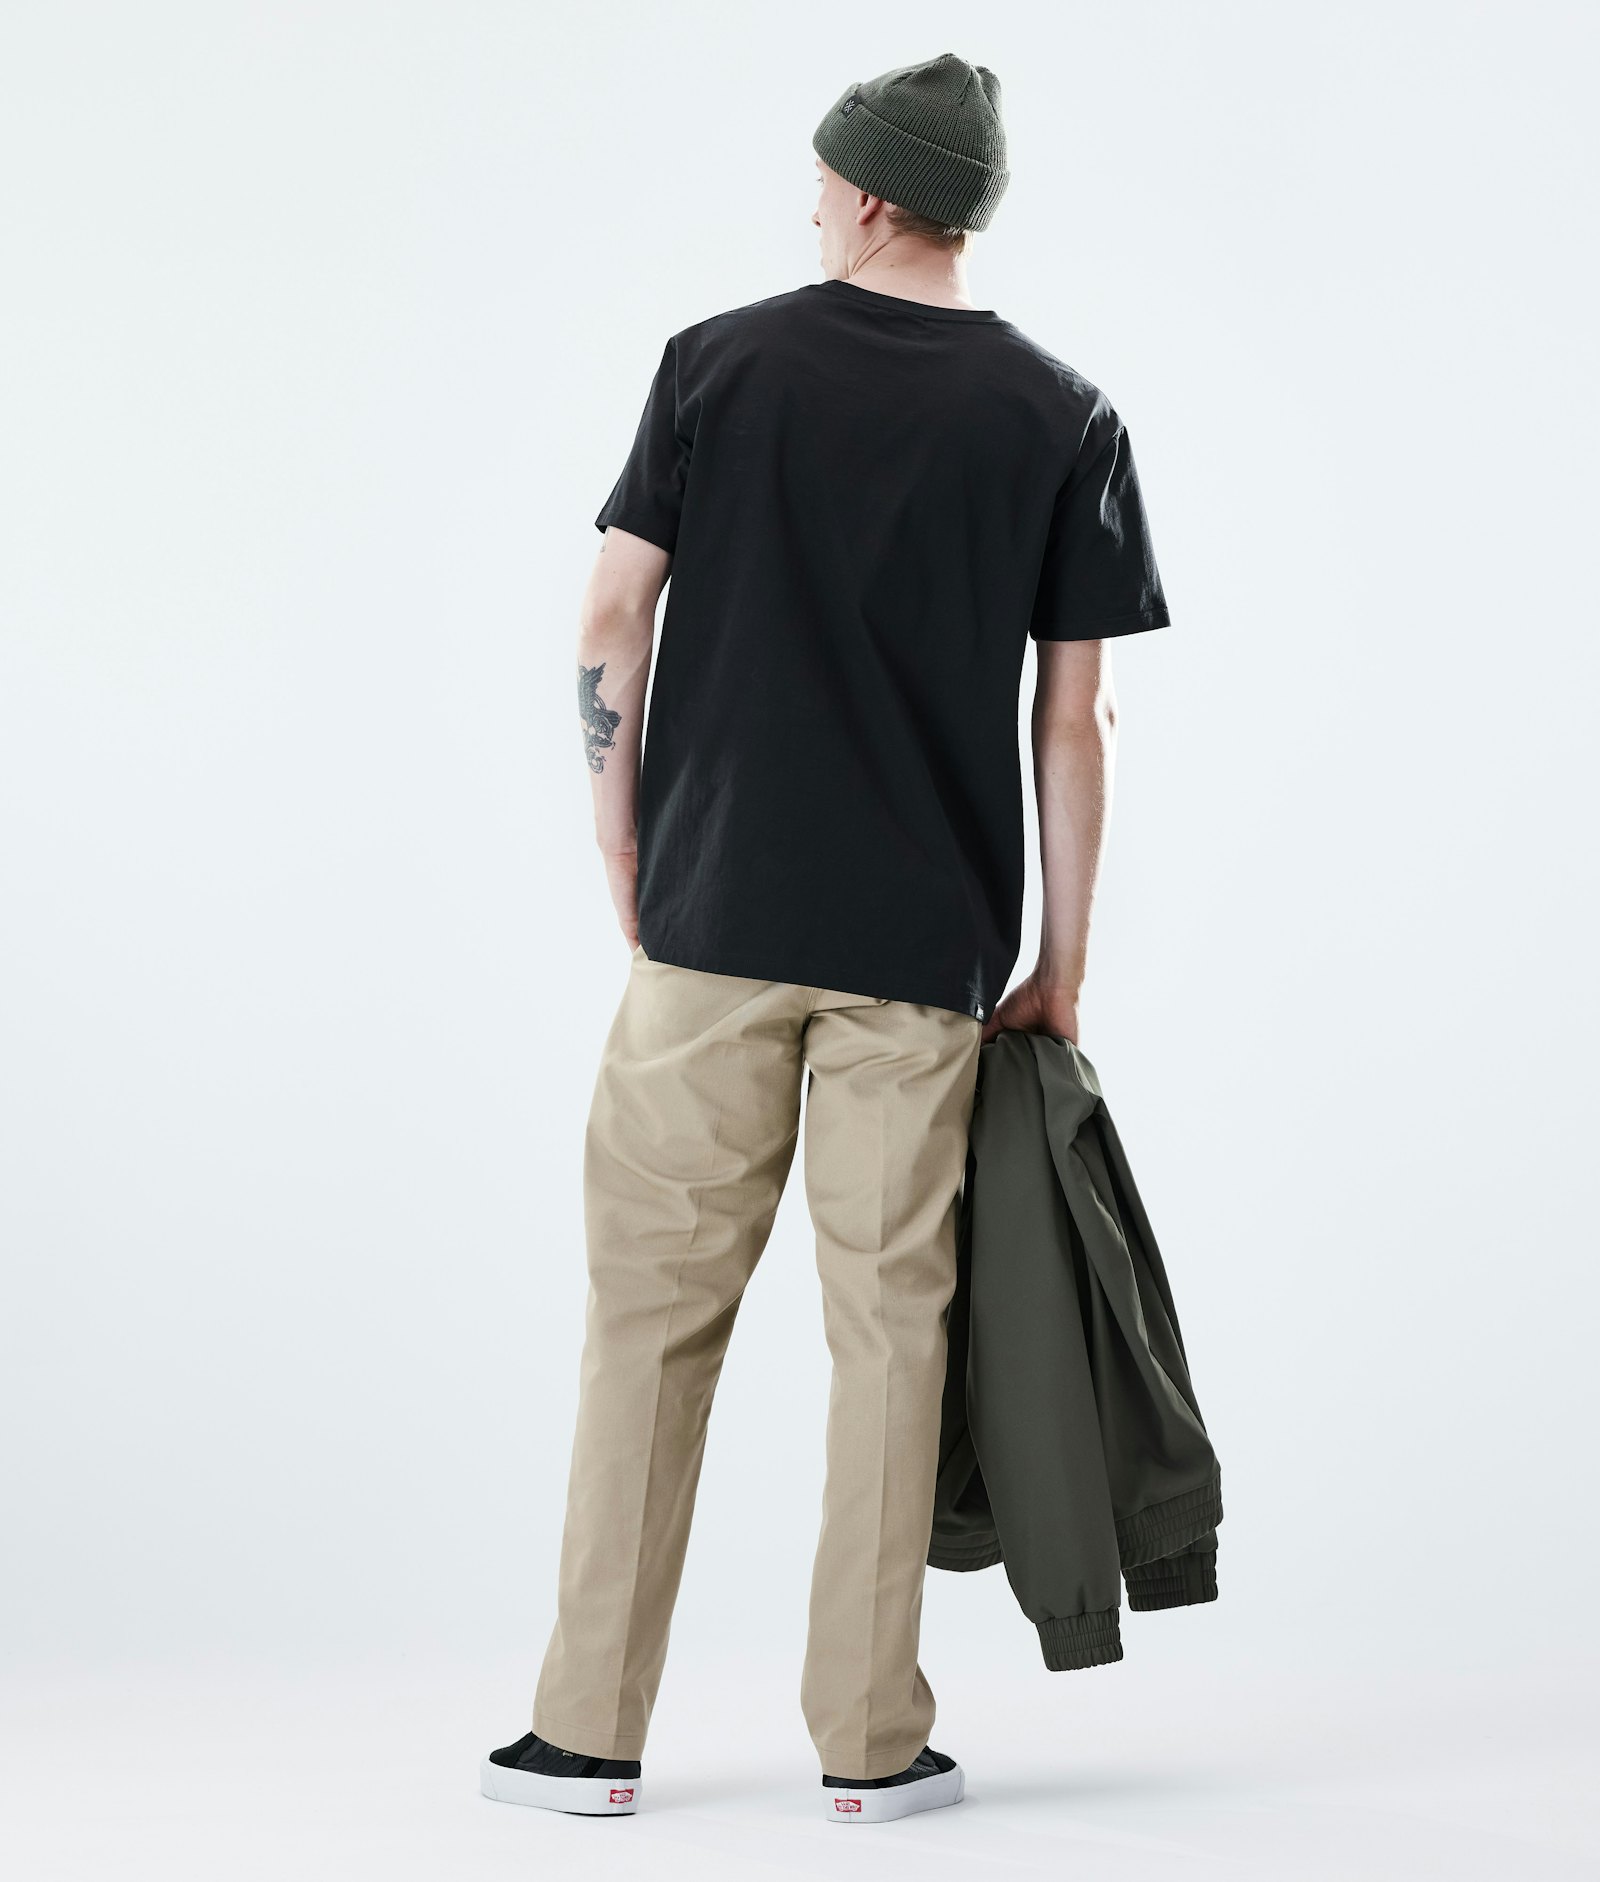 Daily T-shirt Homme Capital Black